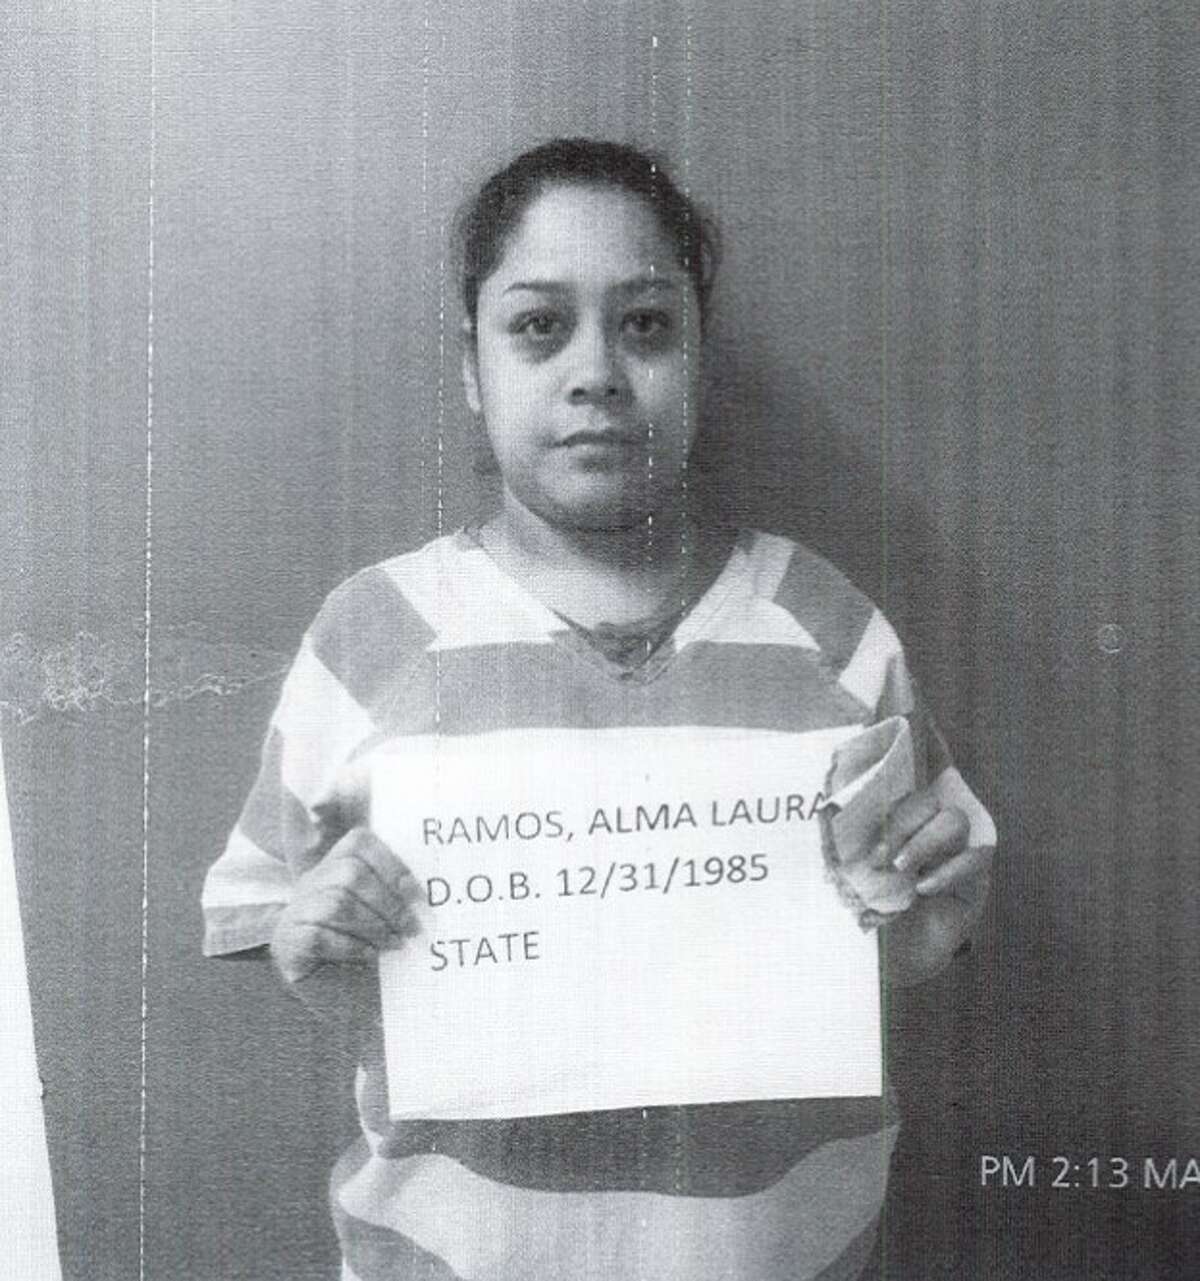 Alma Laura Ramos, 34, was arrested and charged with driving while intoxicated and bribery.